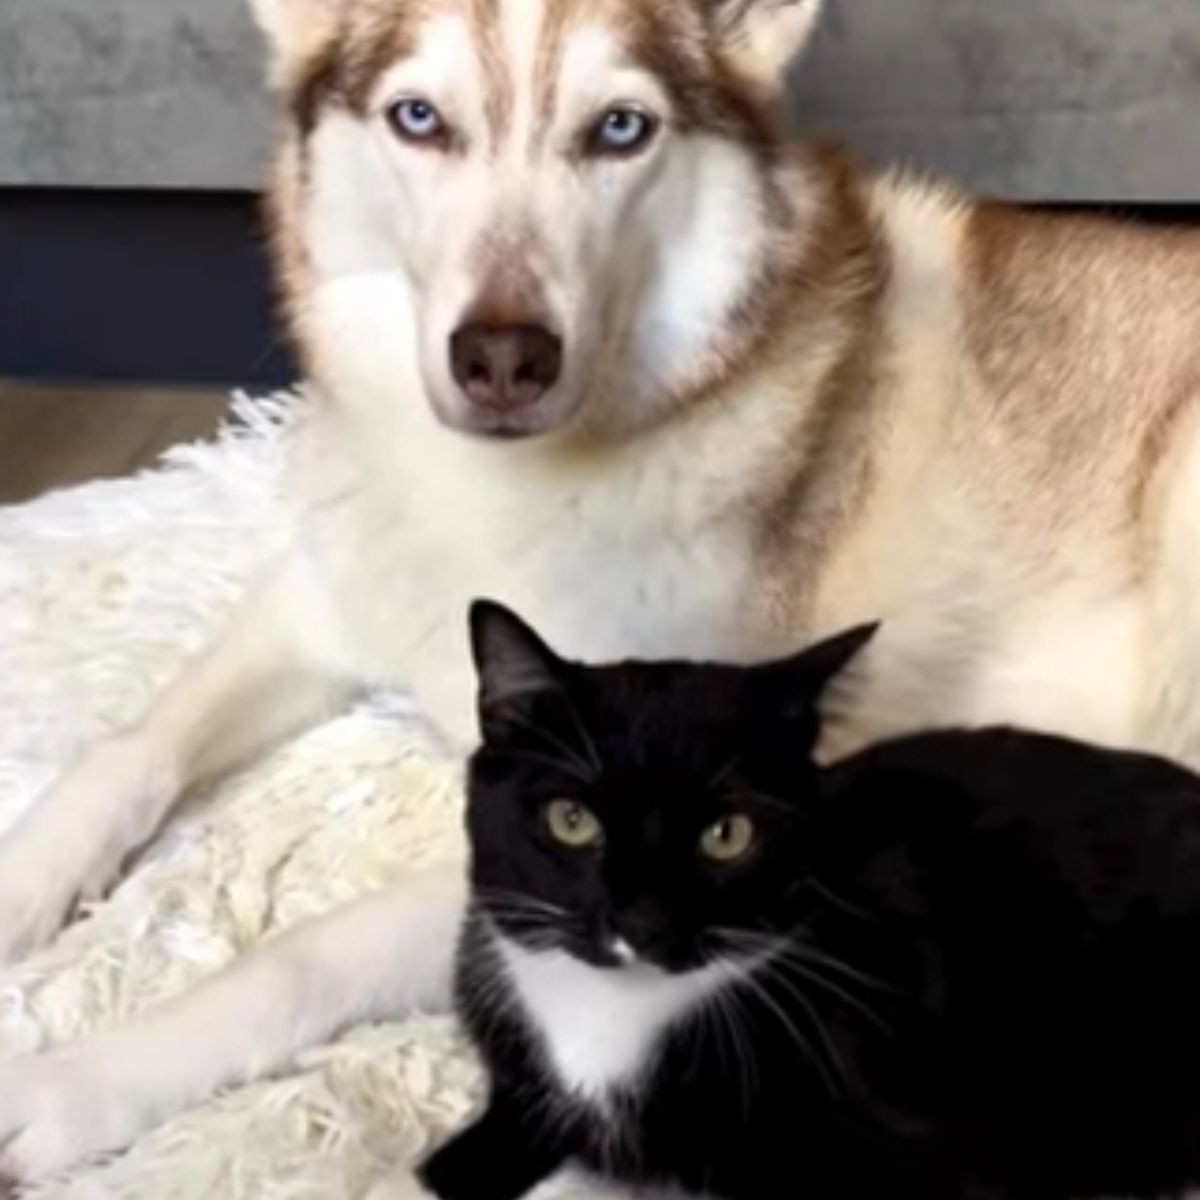 cat and husky lying next to each other